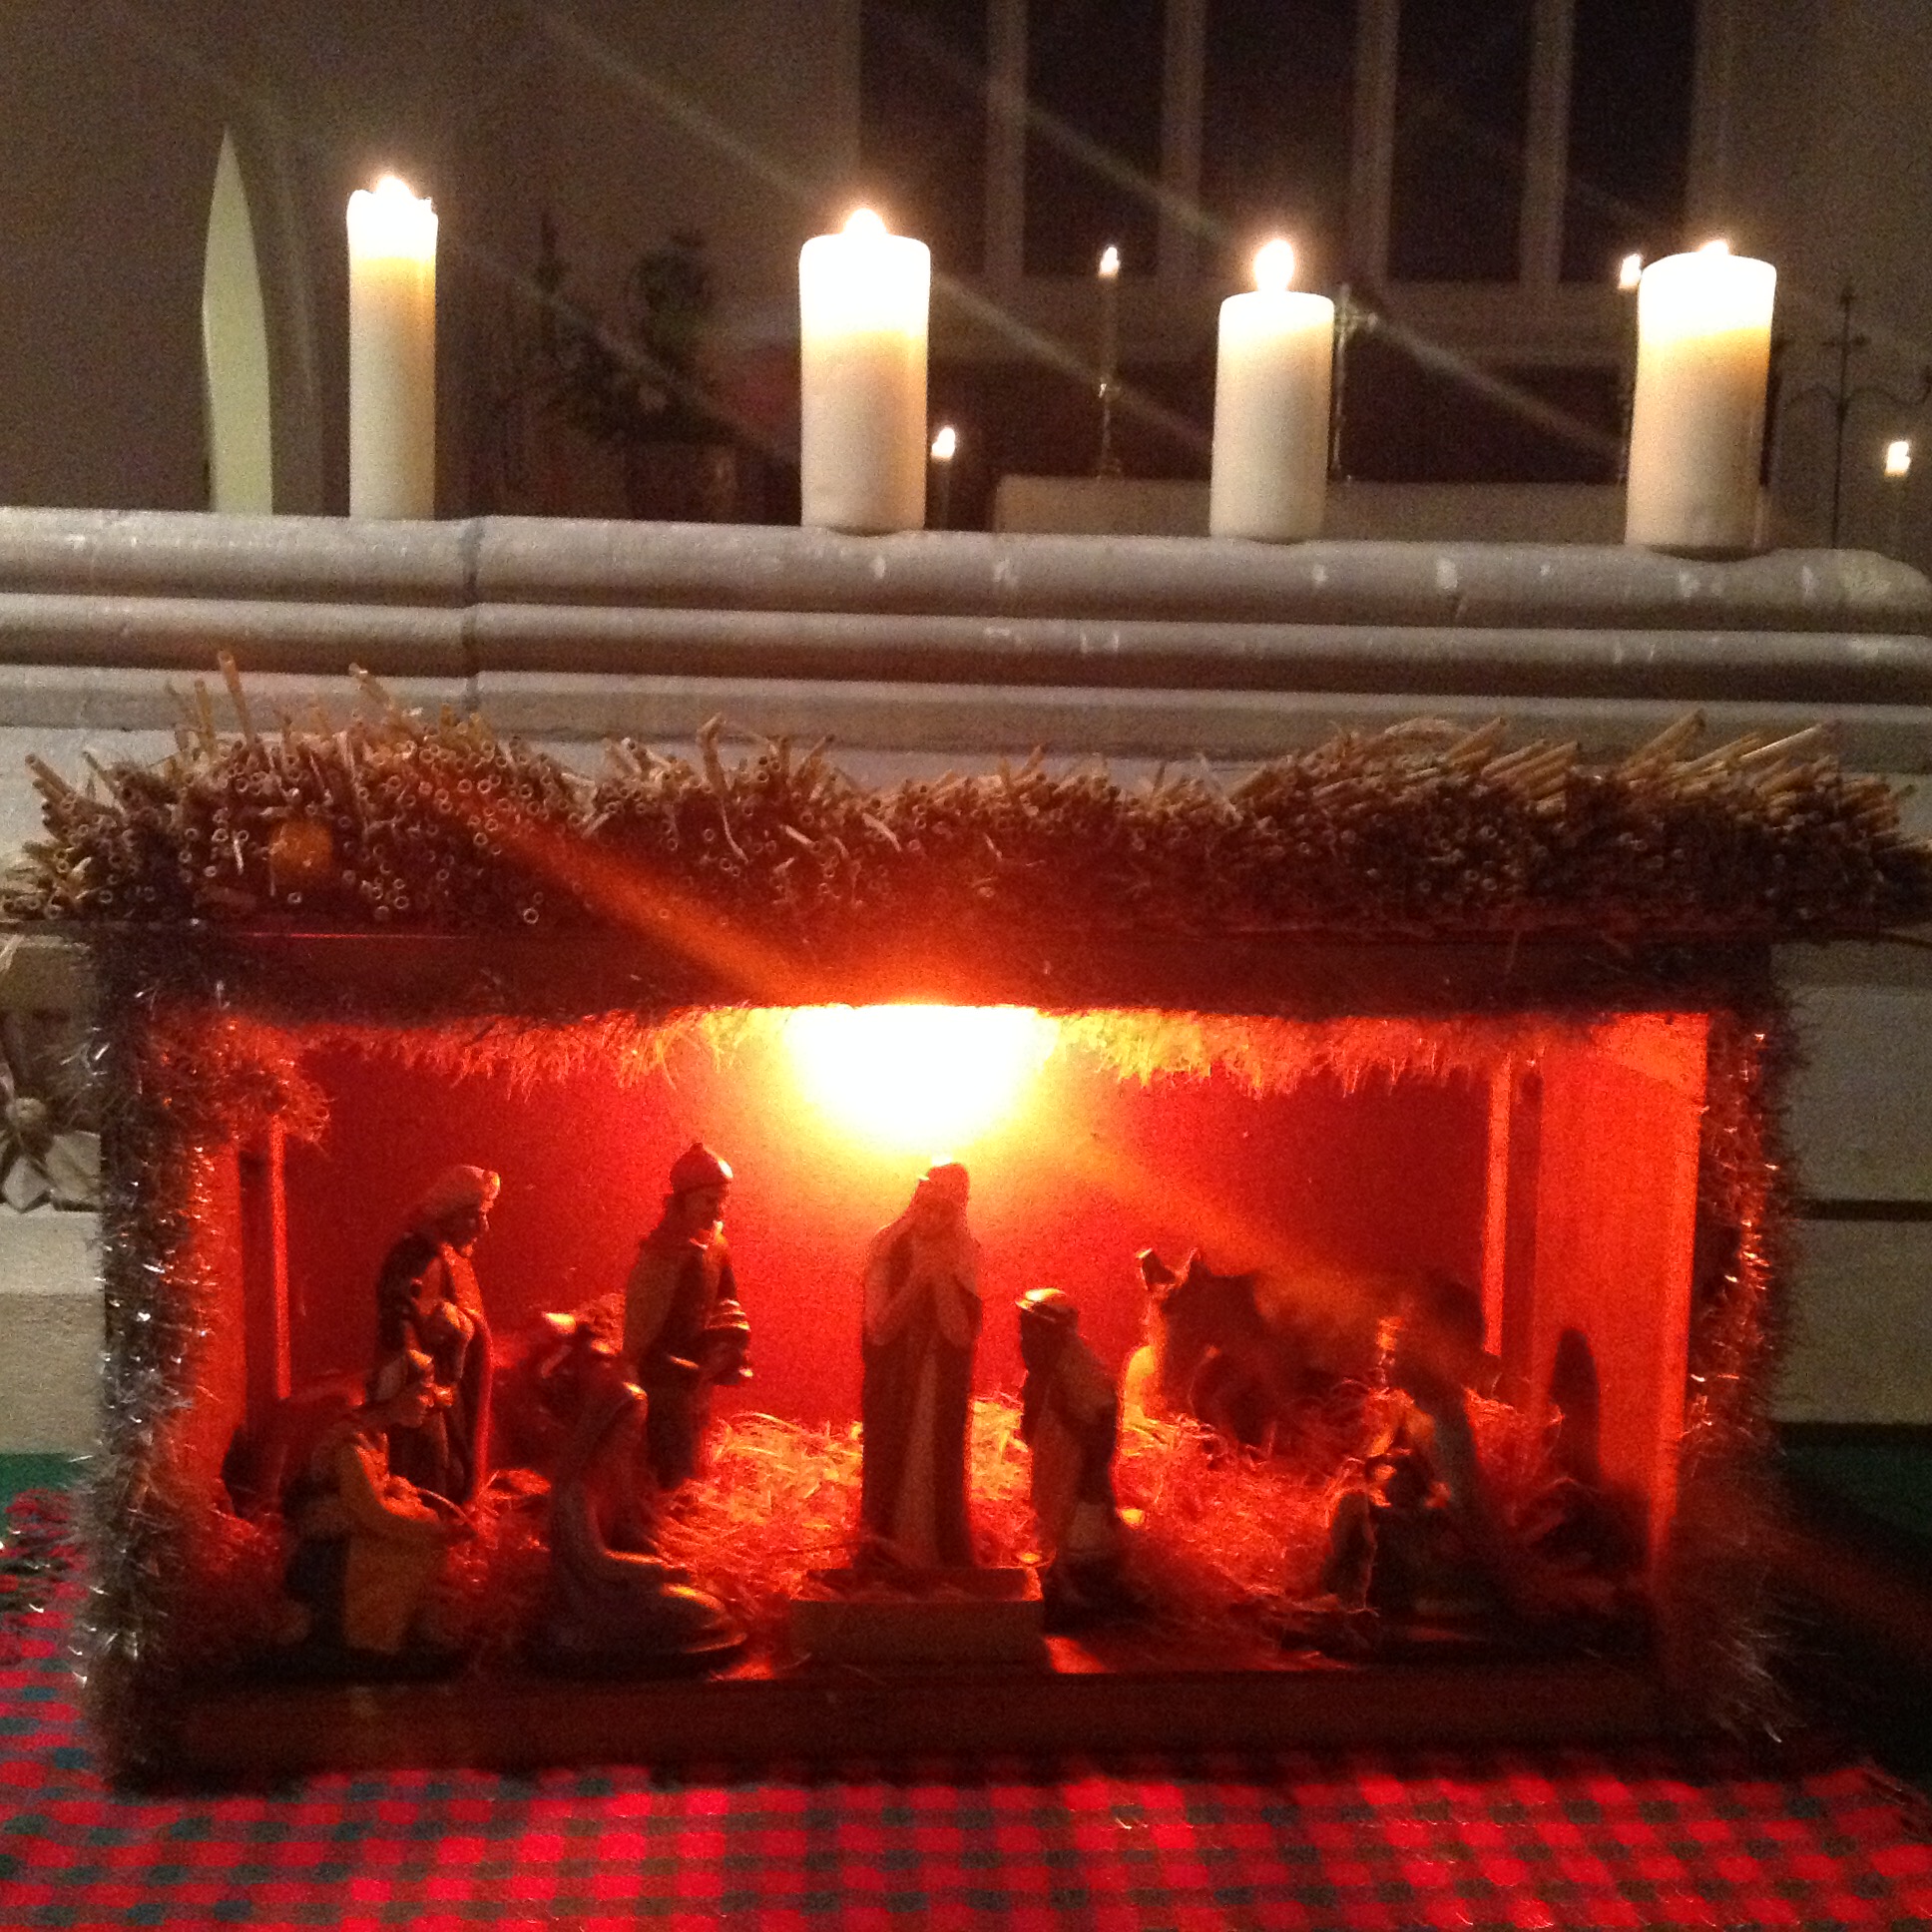 The nativity stable lit with candles